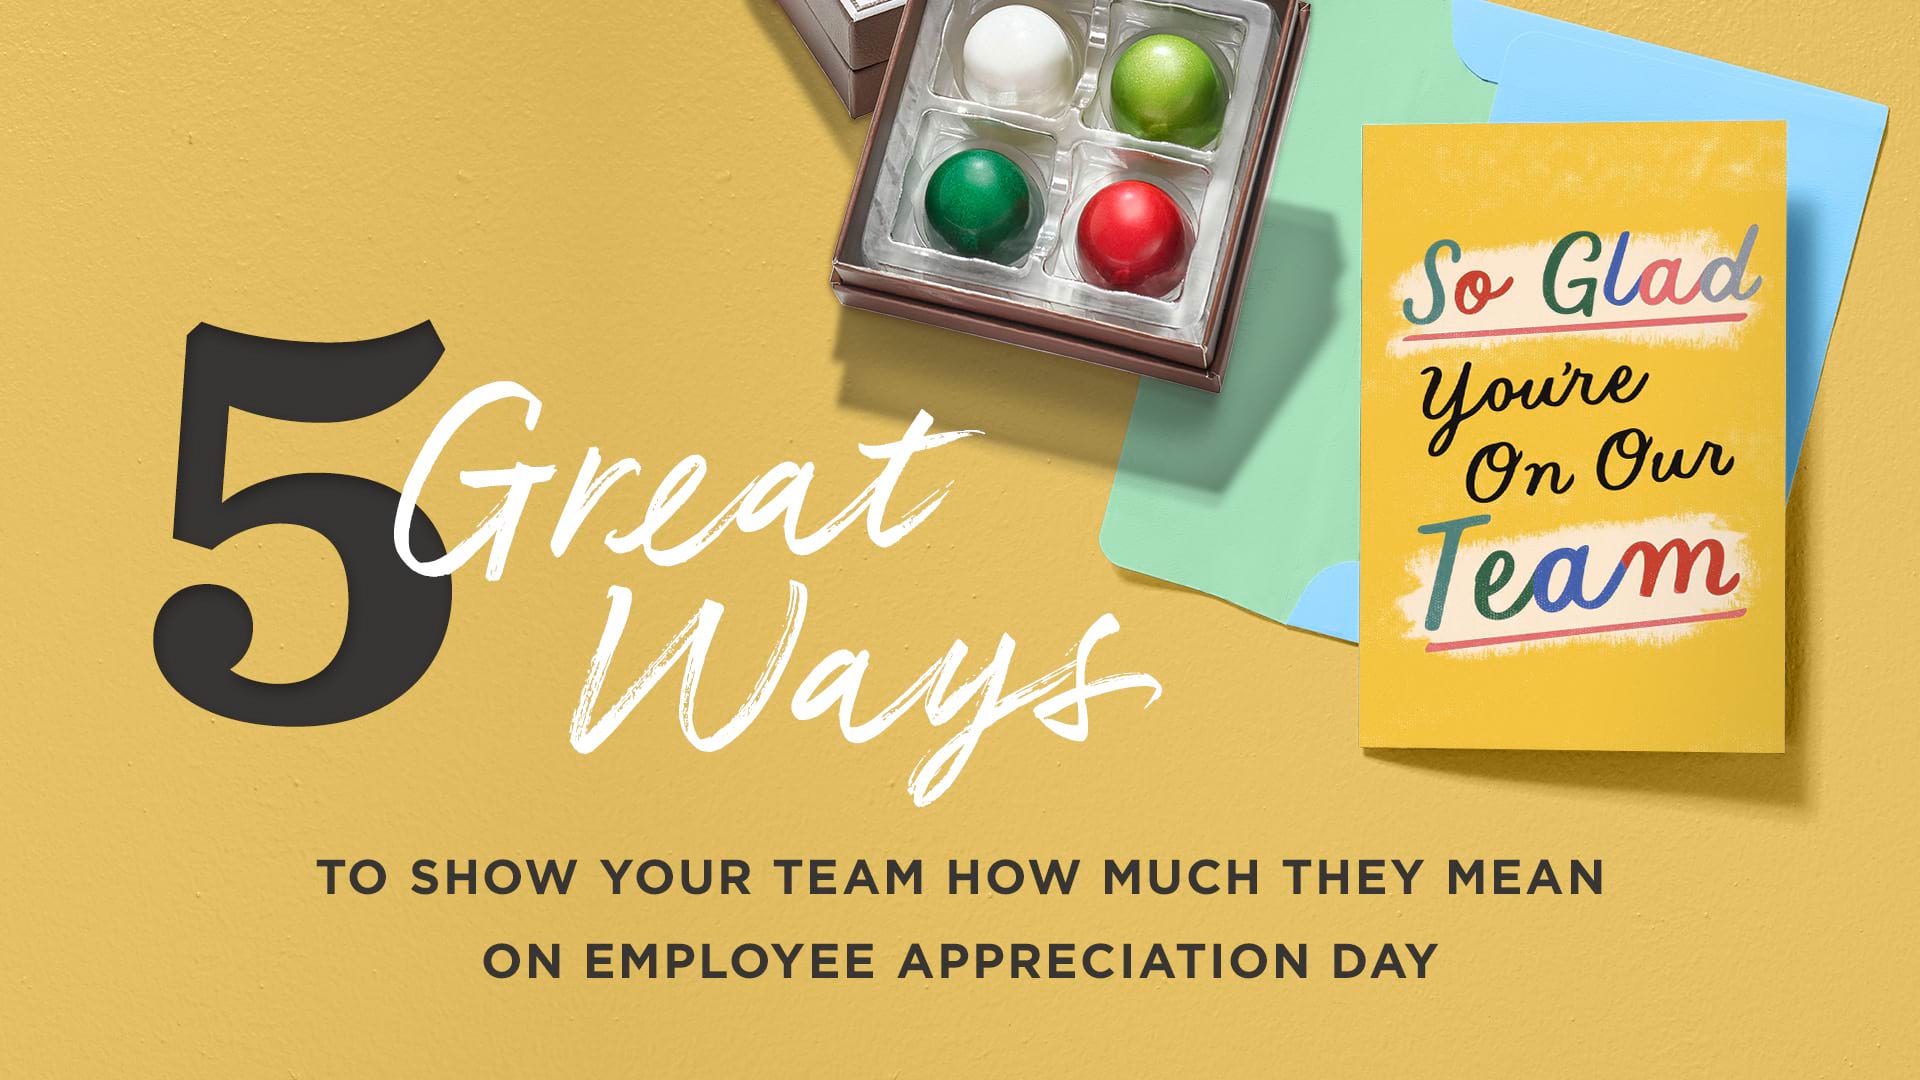 5 Great Ways to Show Your Team How Much They Mean on Employee Appreciation Day ARTICLE HERO IMAGE